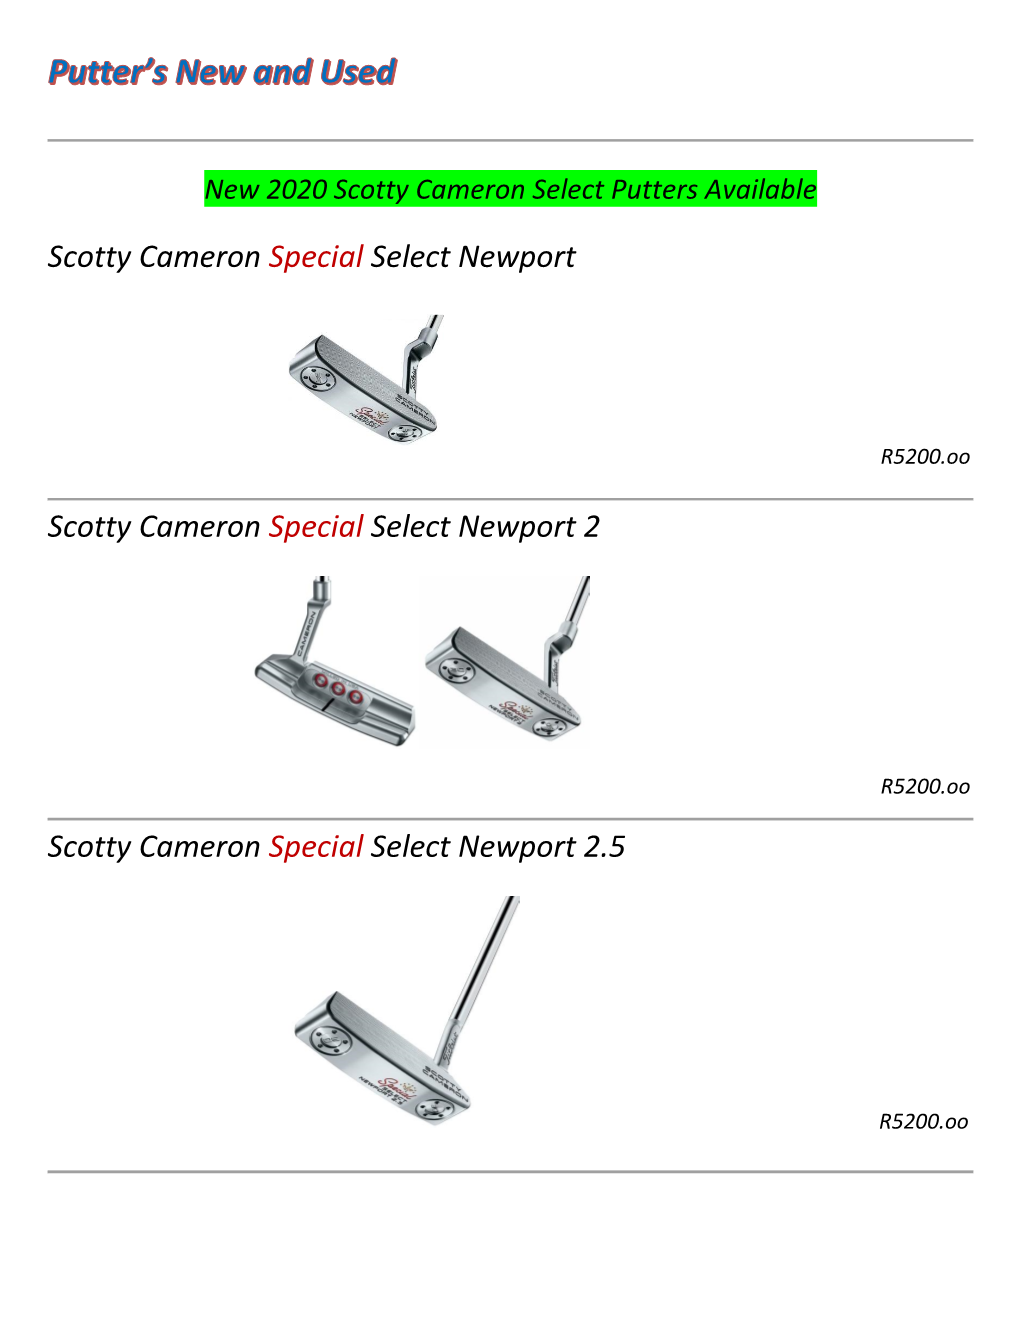 New 2020 Scotty Cameron Select Putters Available